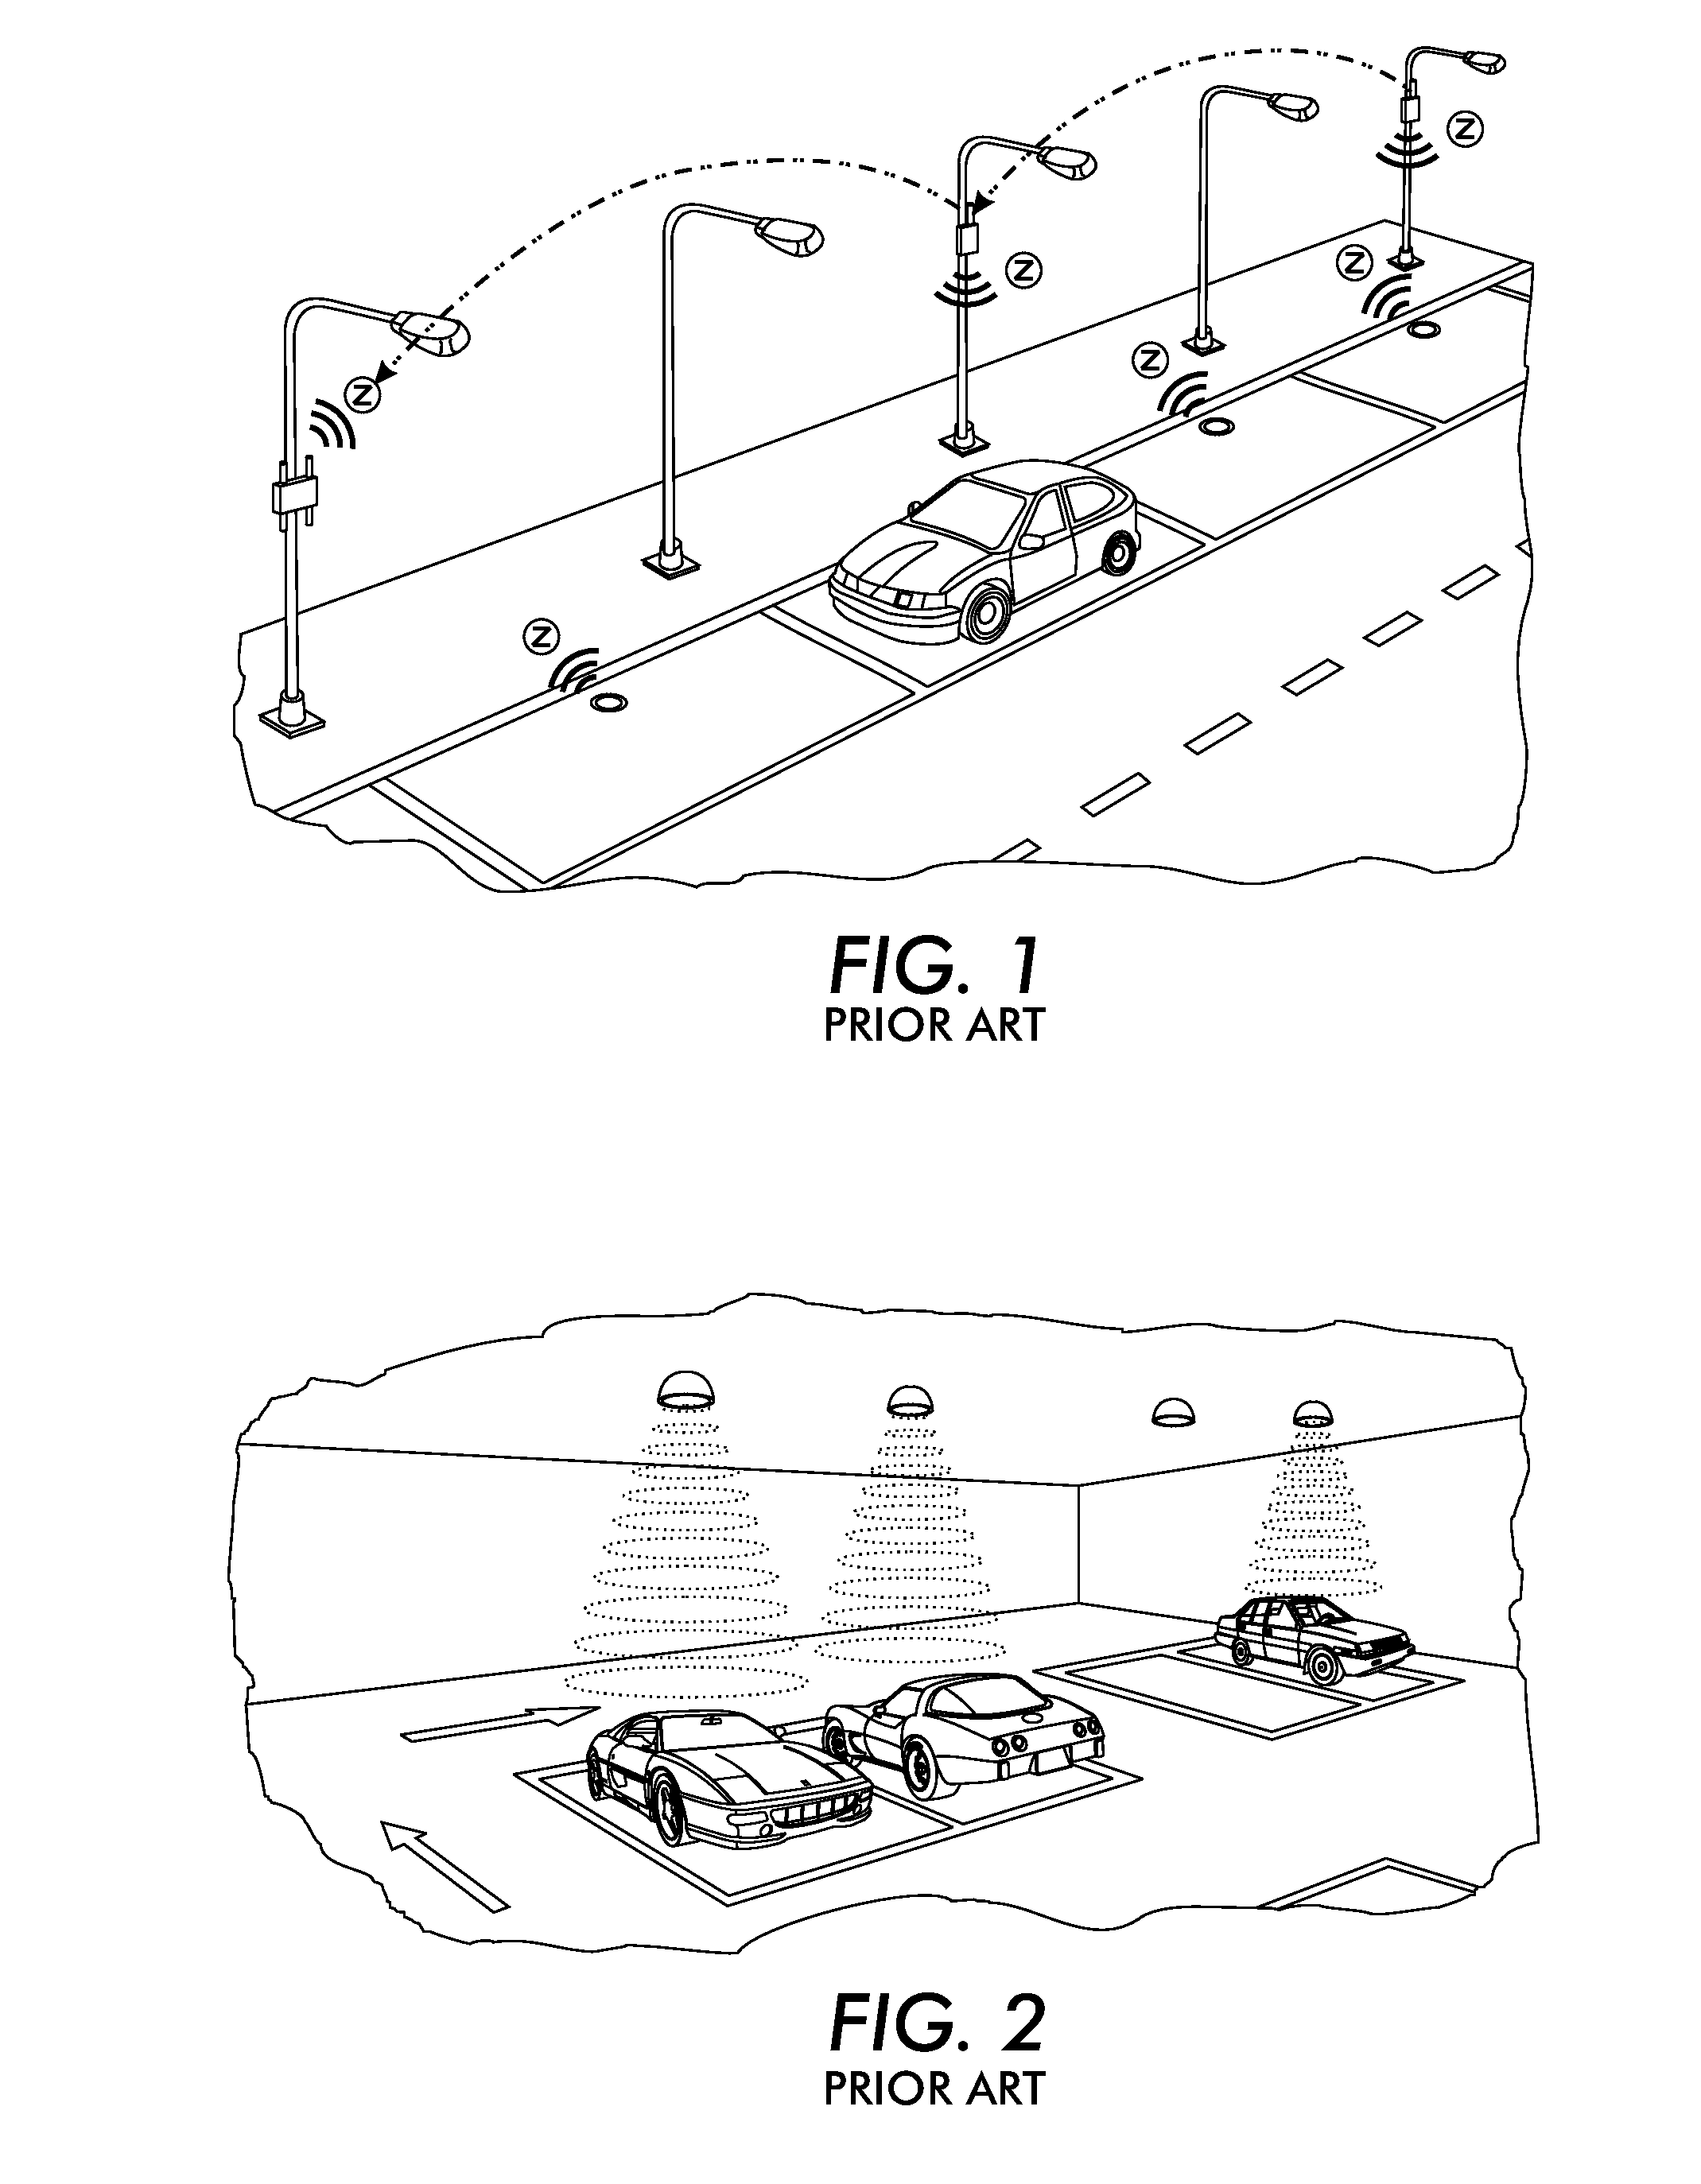 System and method for available parking space estimation for multispace on-street parking